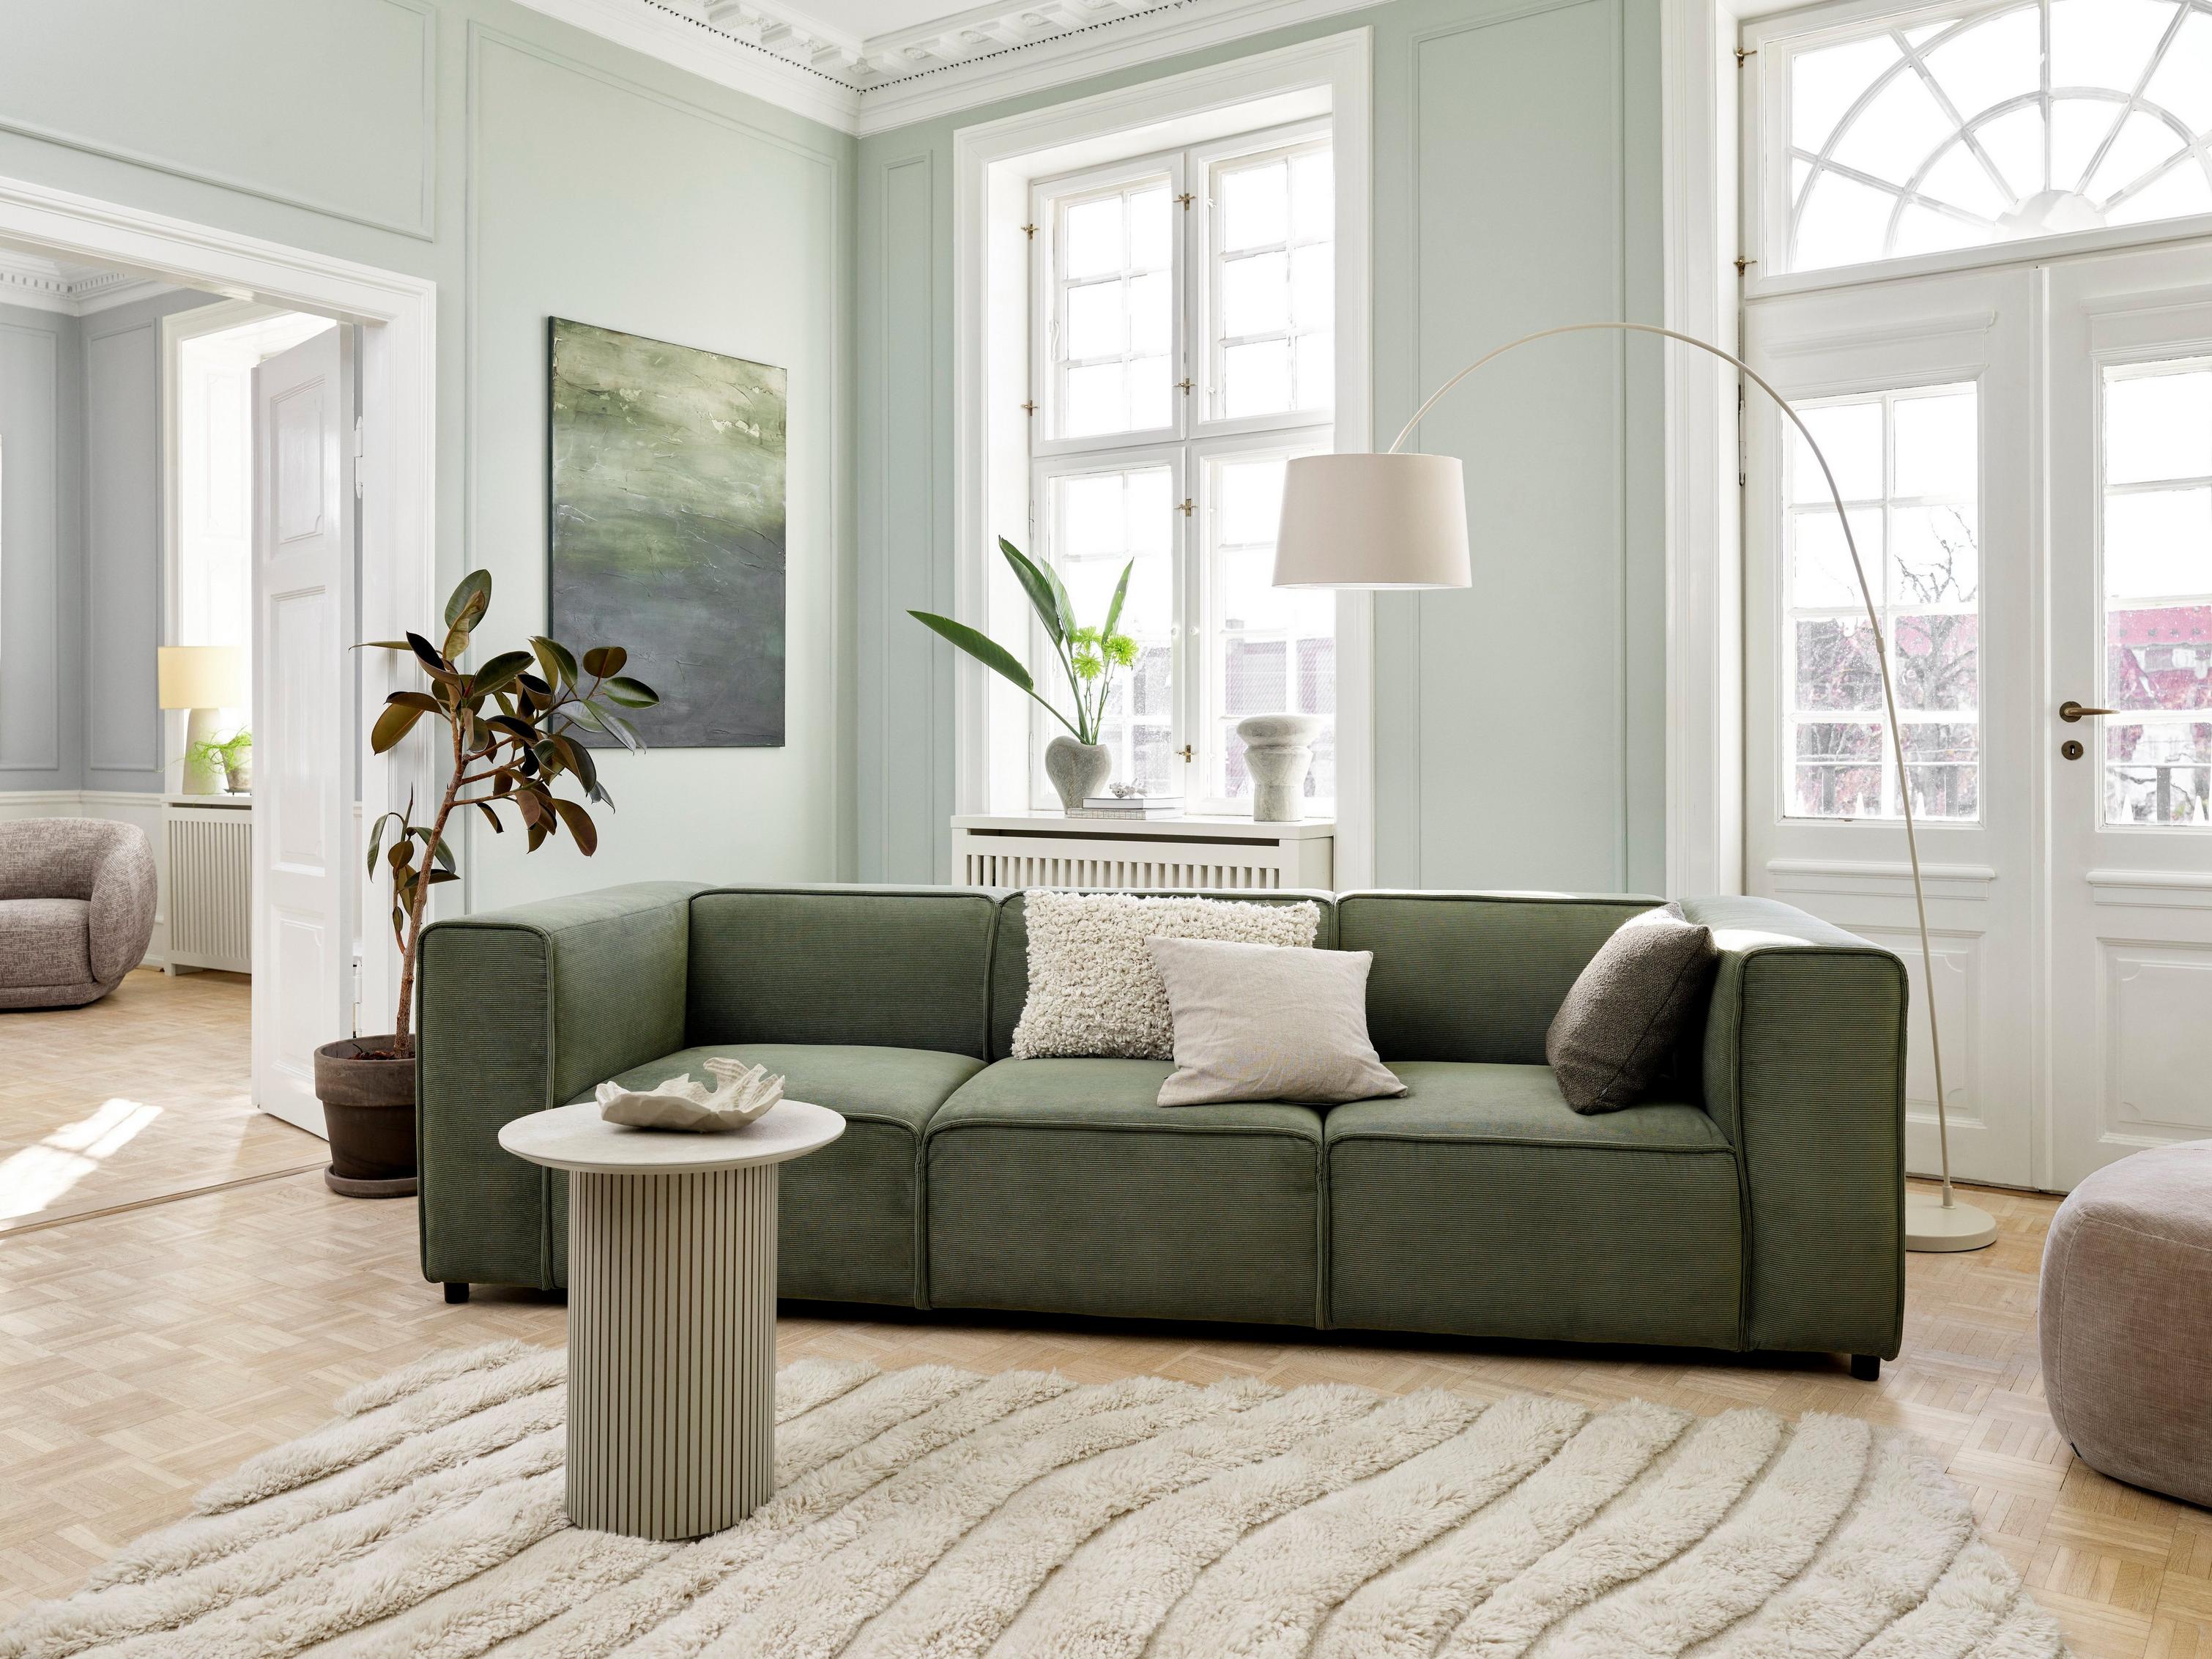 Japandi inspired living space featuring the Carmo sofa in green Skagen fabric.